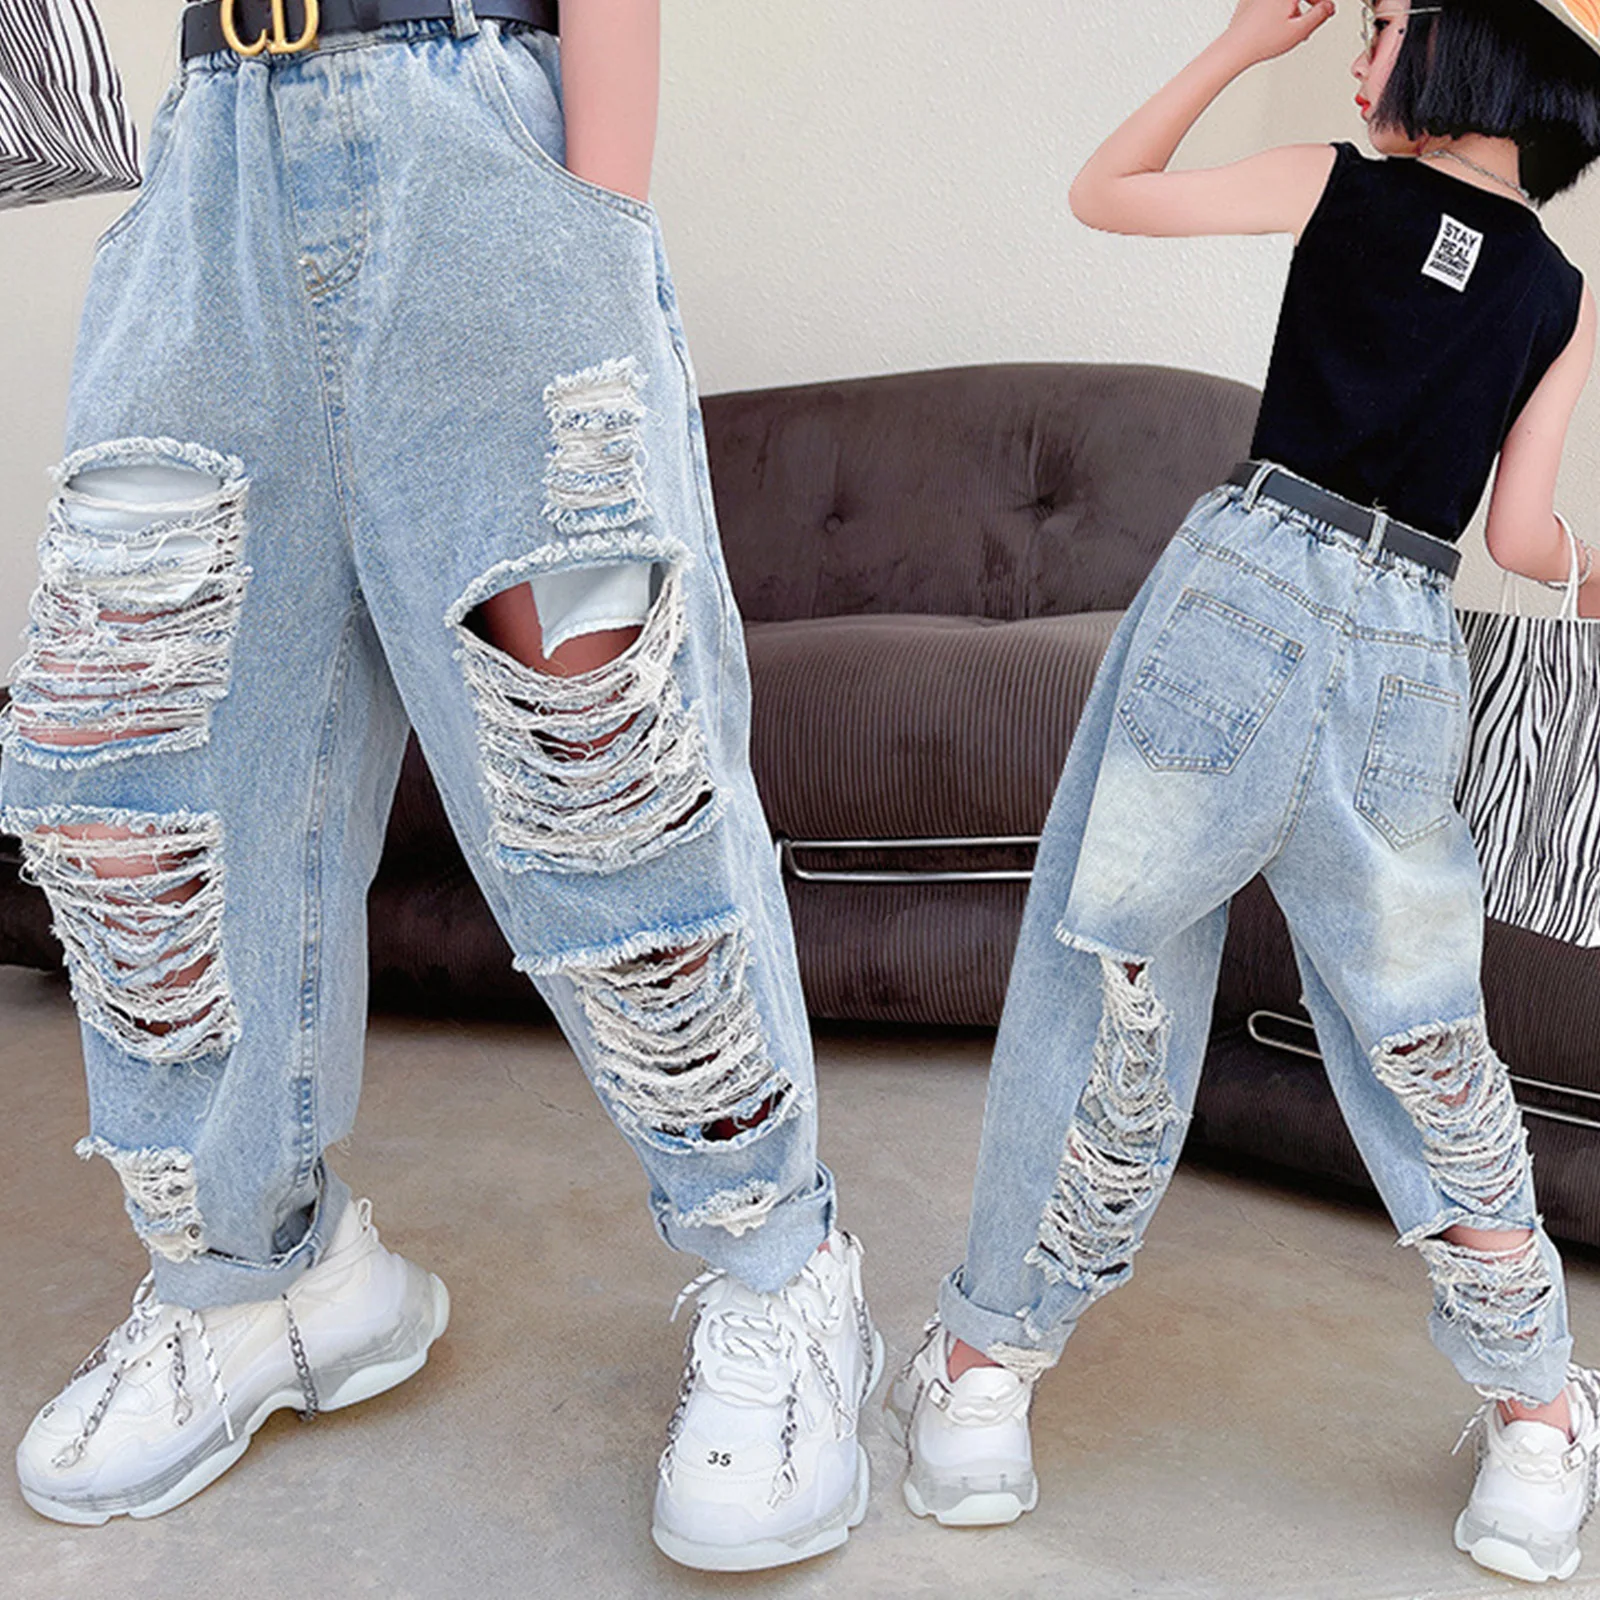 Kids Denim Ripped Trousers Children's Clothing Korean Fashion High Waist Jeans Slim Color Hole Ripped Pants for Teen Girls 5-14Y